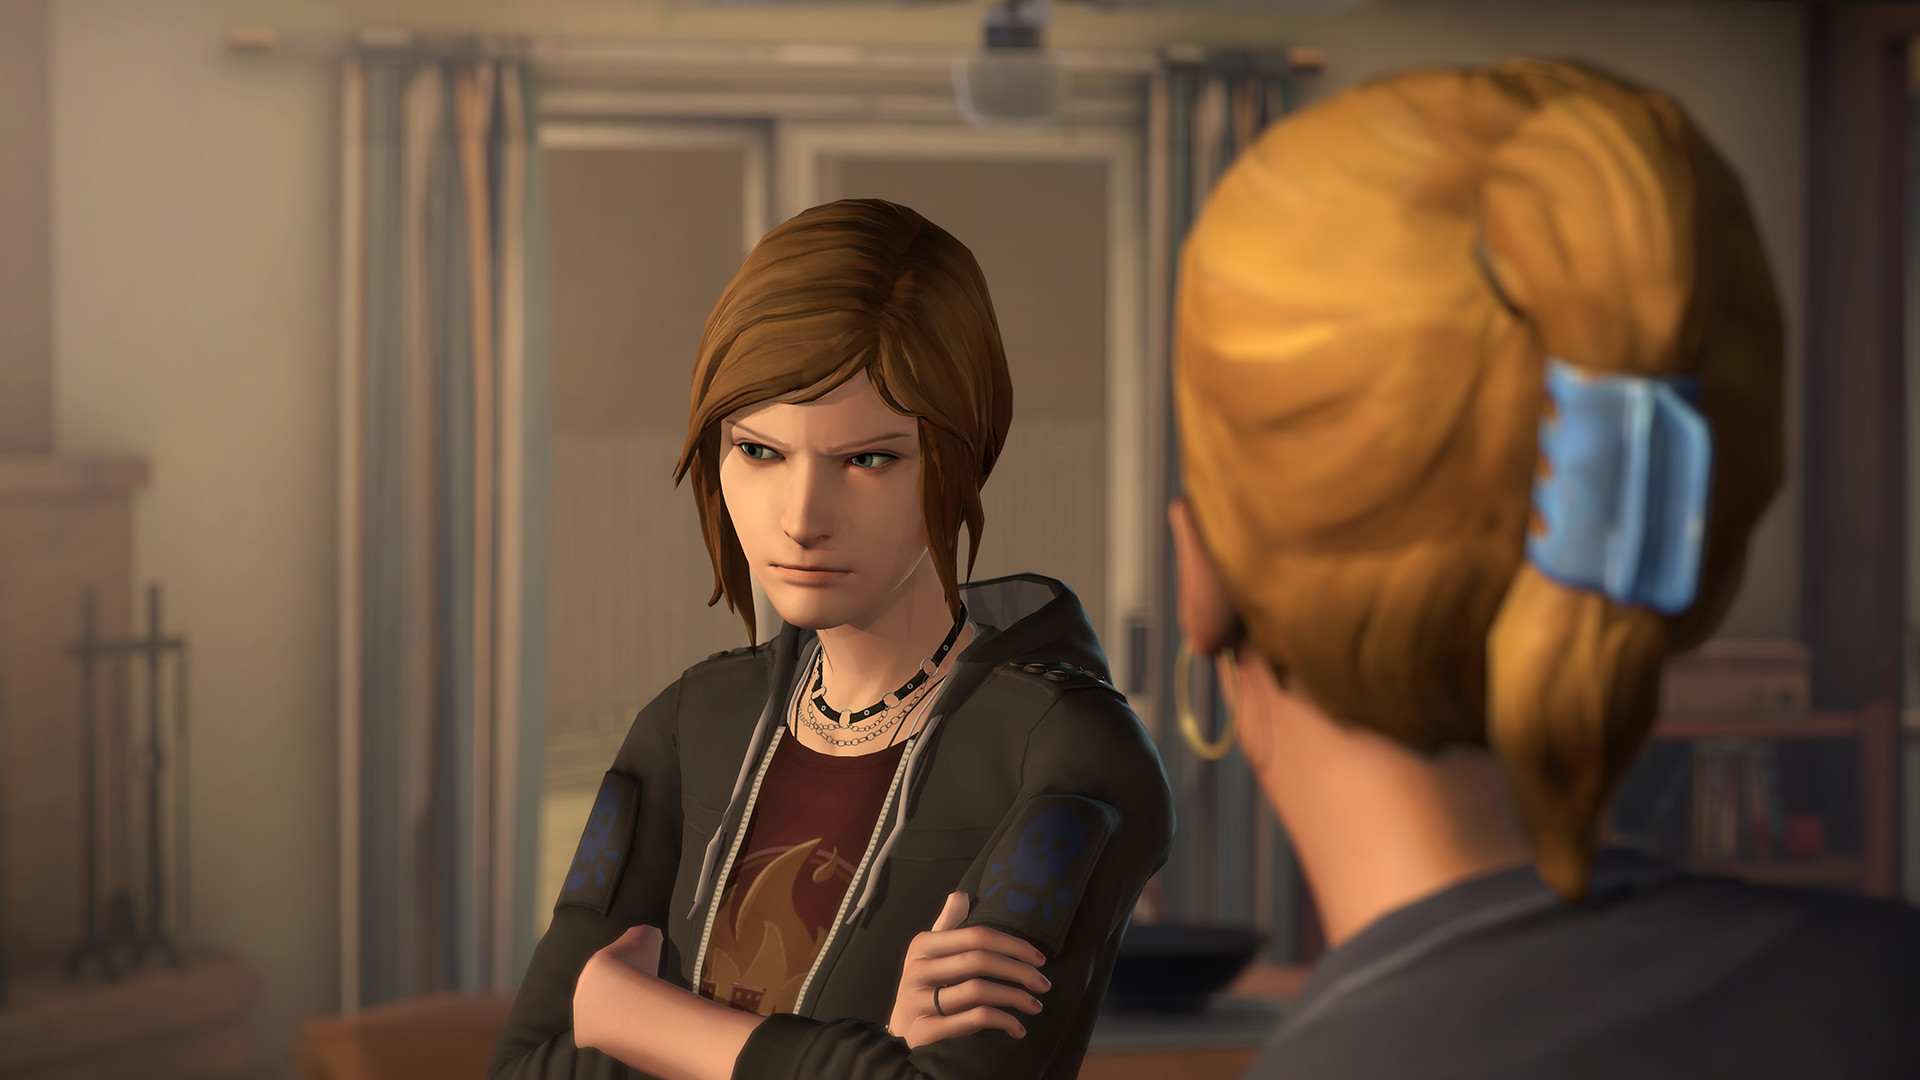 Life is Strange Before The Storm Linux'ta